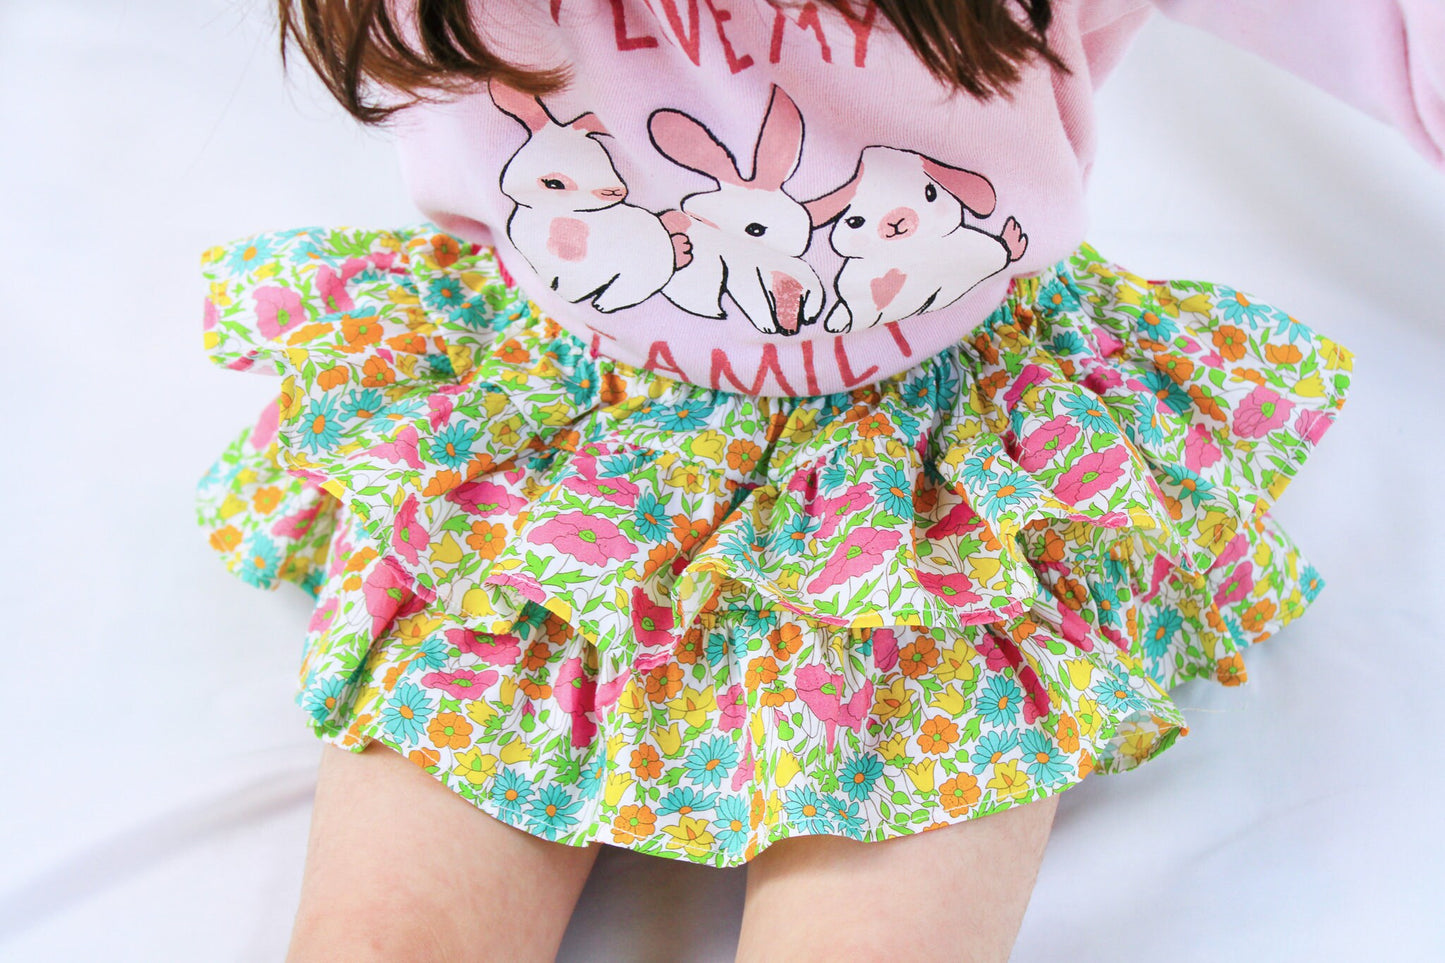 SAMPLE SALE - READY to ship Liberty ruffle bloomer swimsuit baby girl diaper cover floral print knickers nappies cover cotton Tana Lawn